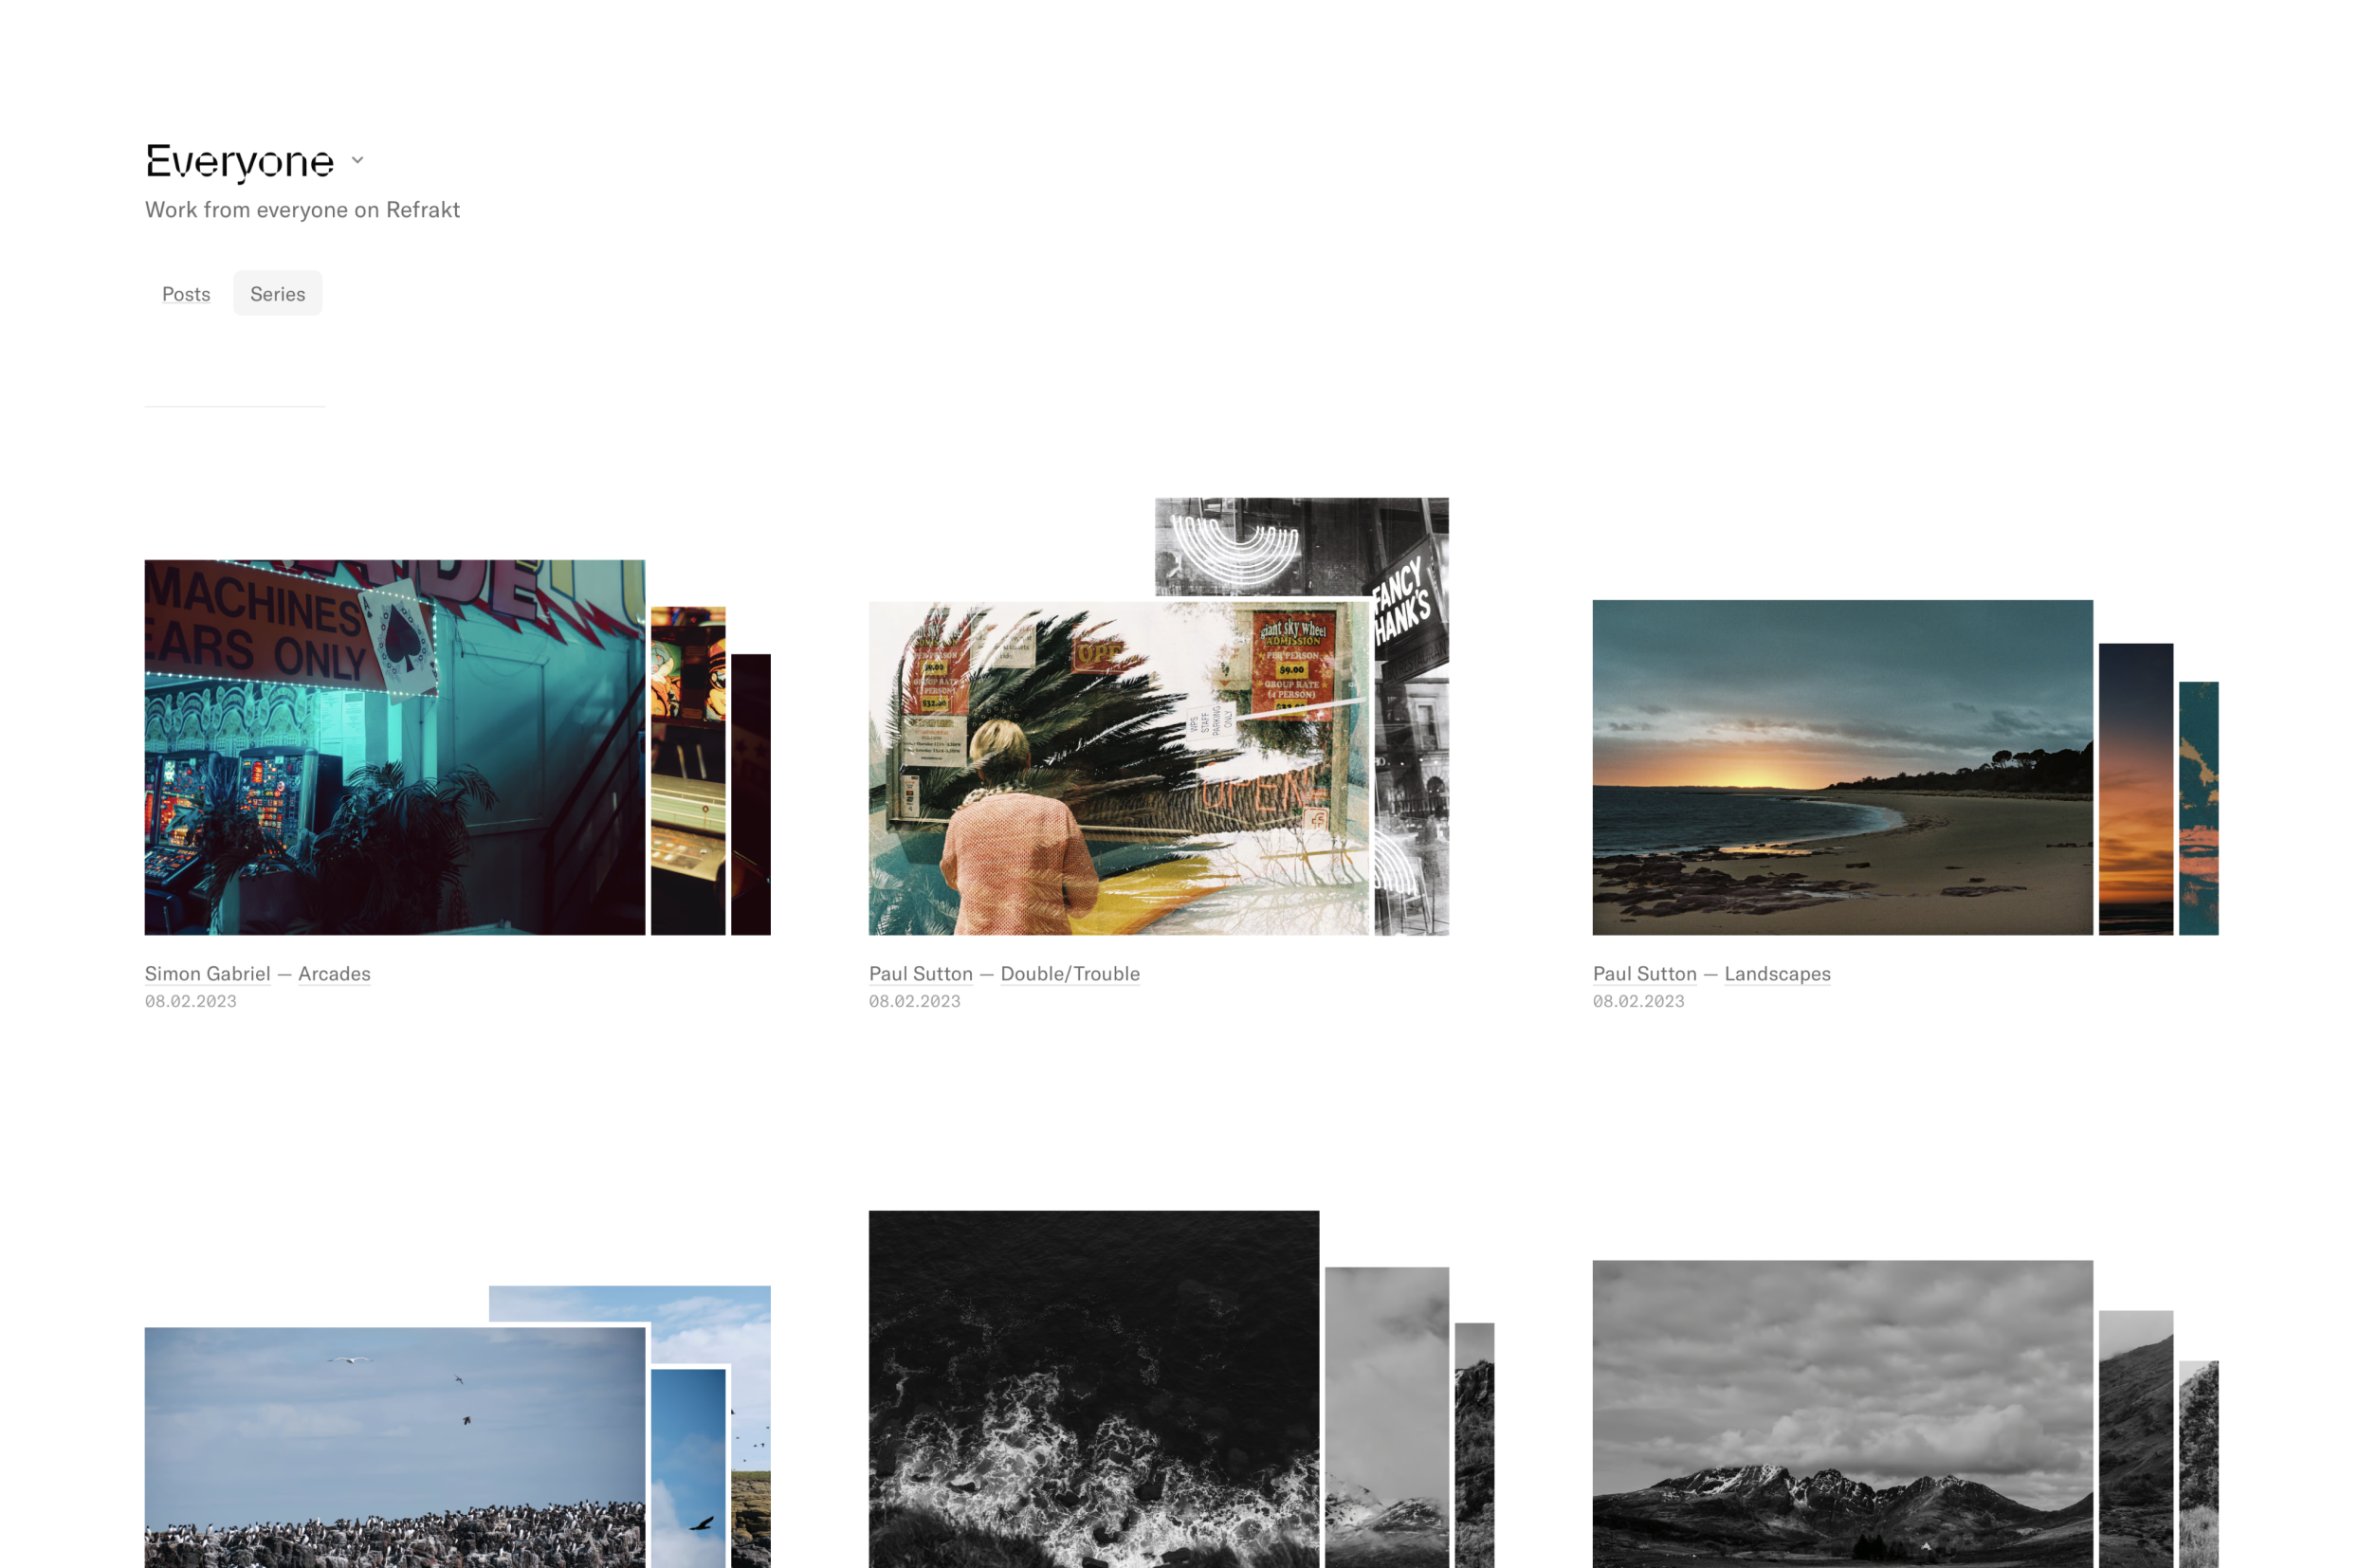 A screenshot of the new Series tab on the Home feed. It shows several series posted by photographers on Refrakt.